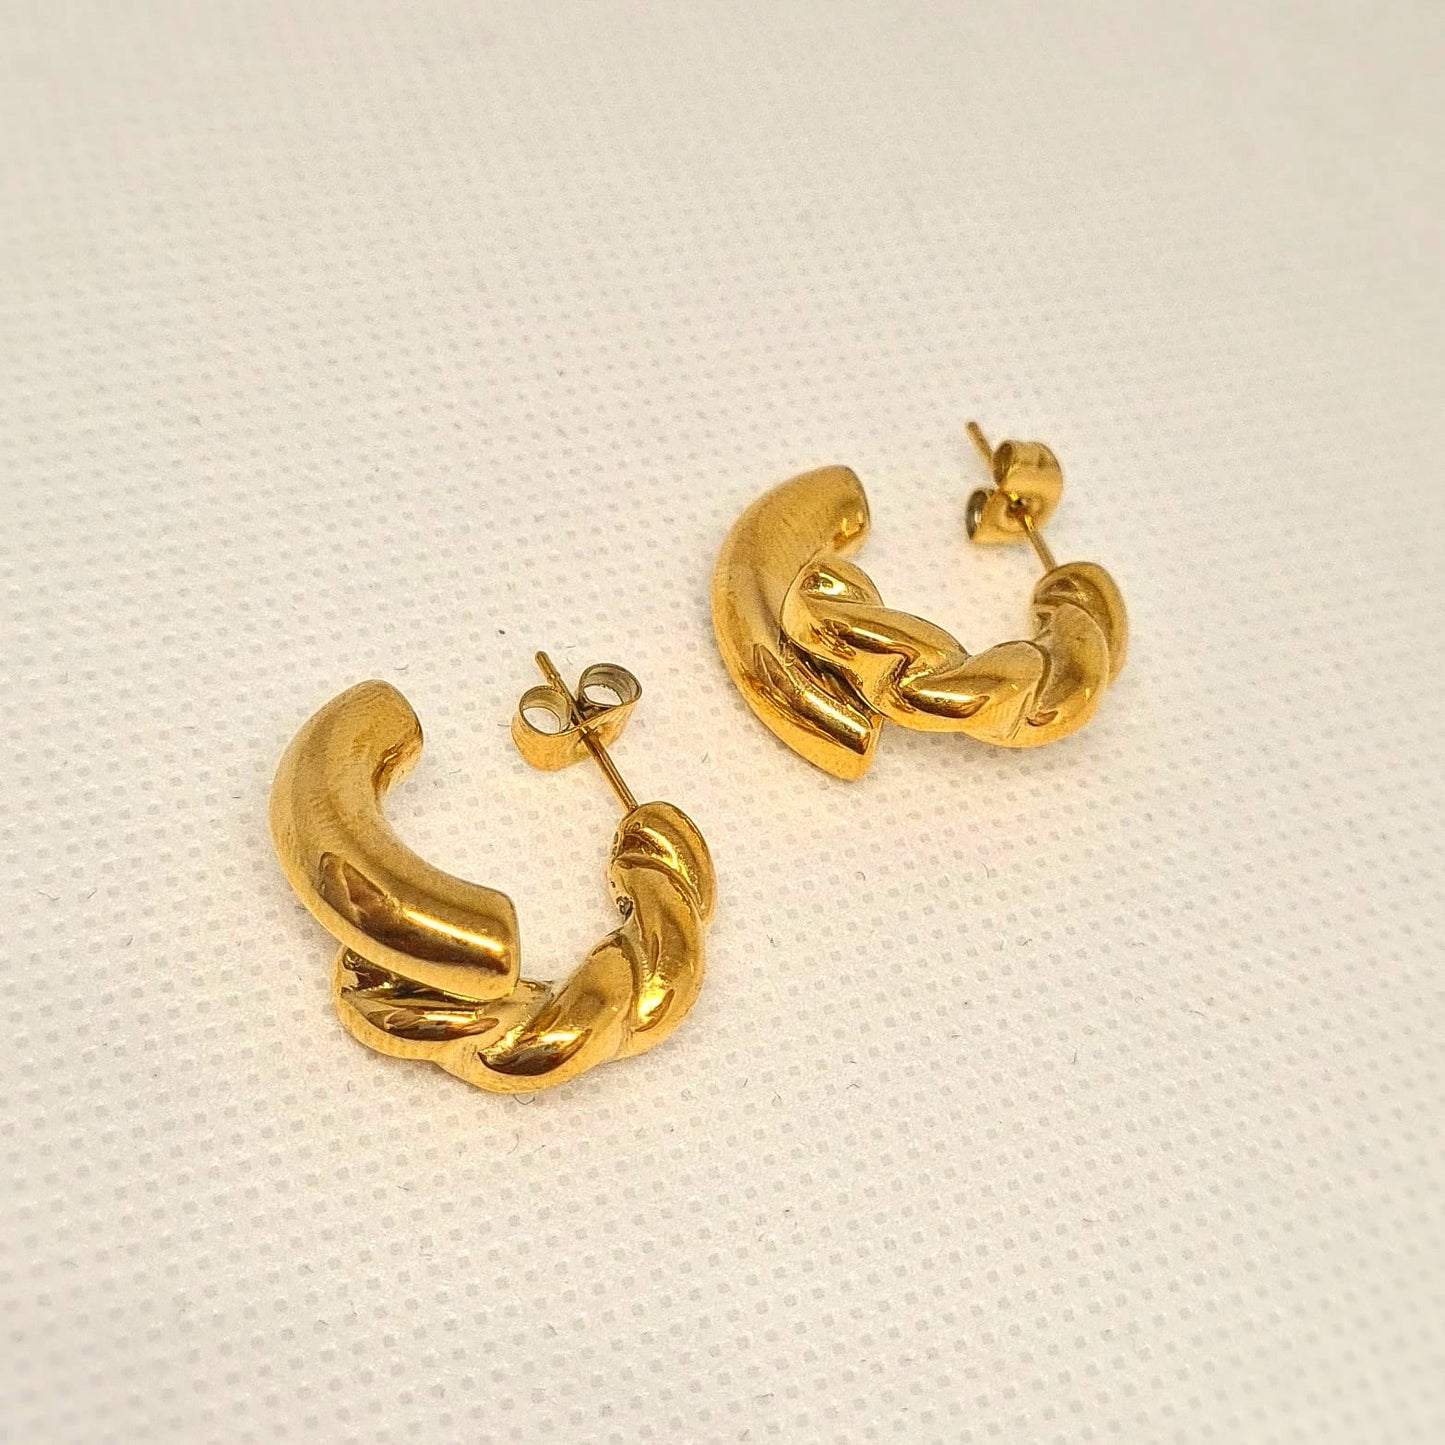 Gold hoop earrings sitting on white surface. The earrings are a classic and elegant style that would be perfect for any occasion. The earrings are made of gold and have a hoop design. The hoops are large and round, and they sit on a white surface.